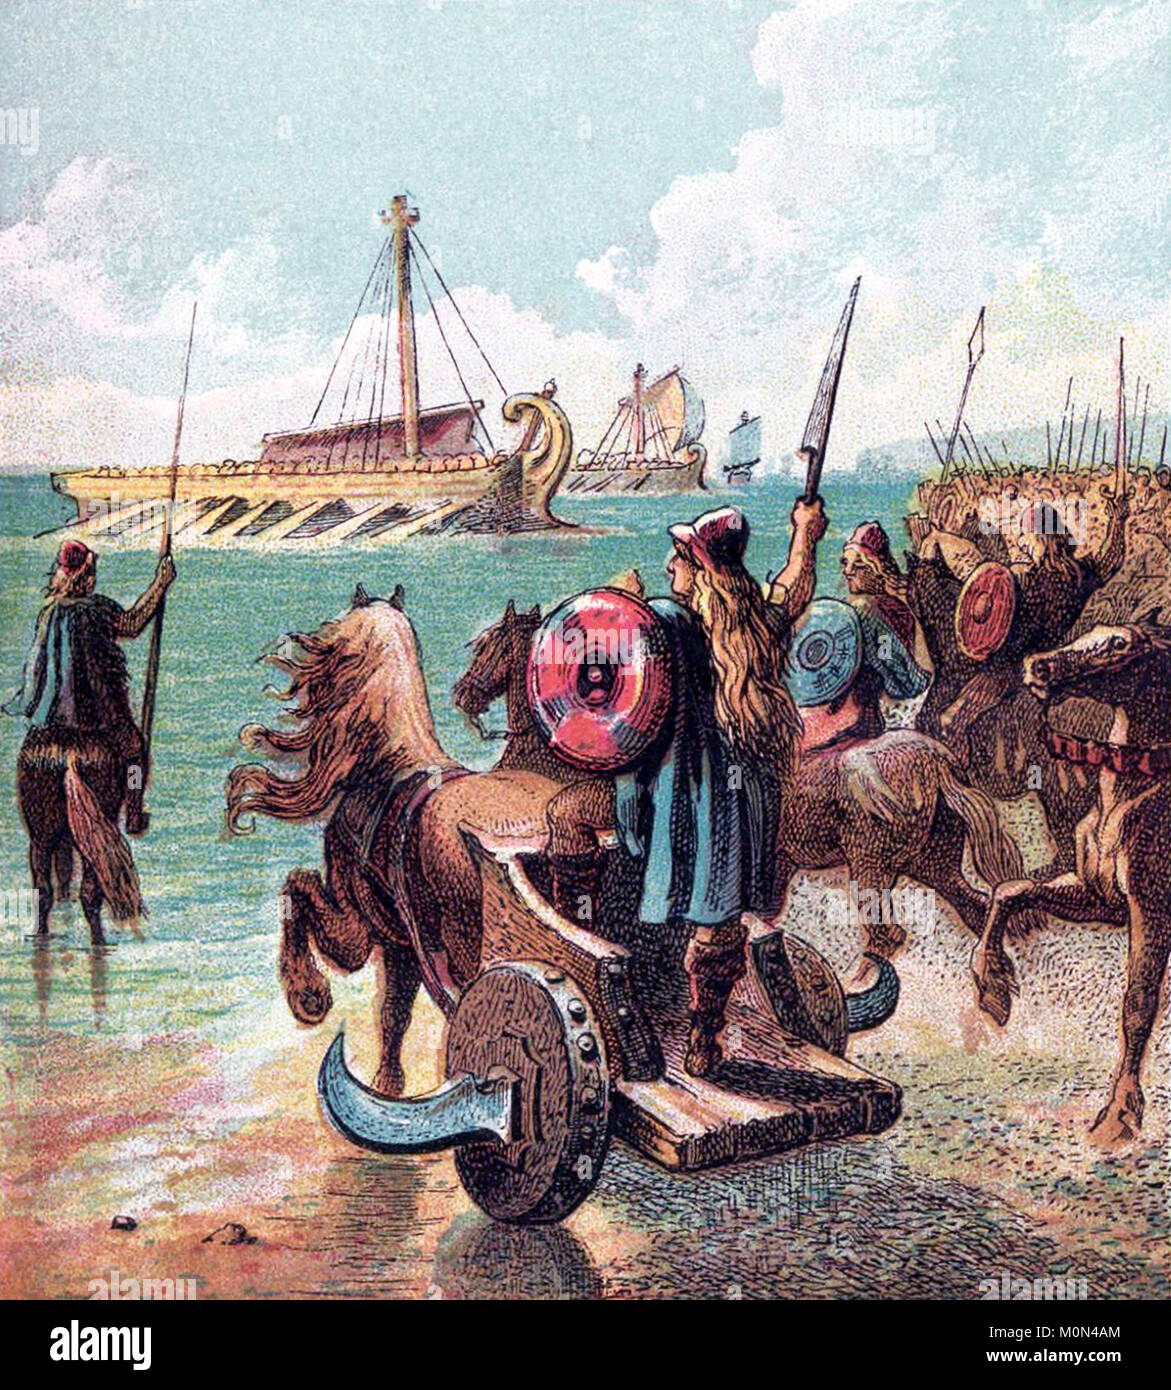 The Roman conquest. The Romans Conquer Britain. Illustration from a book published in 1868 Stock Photo